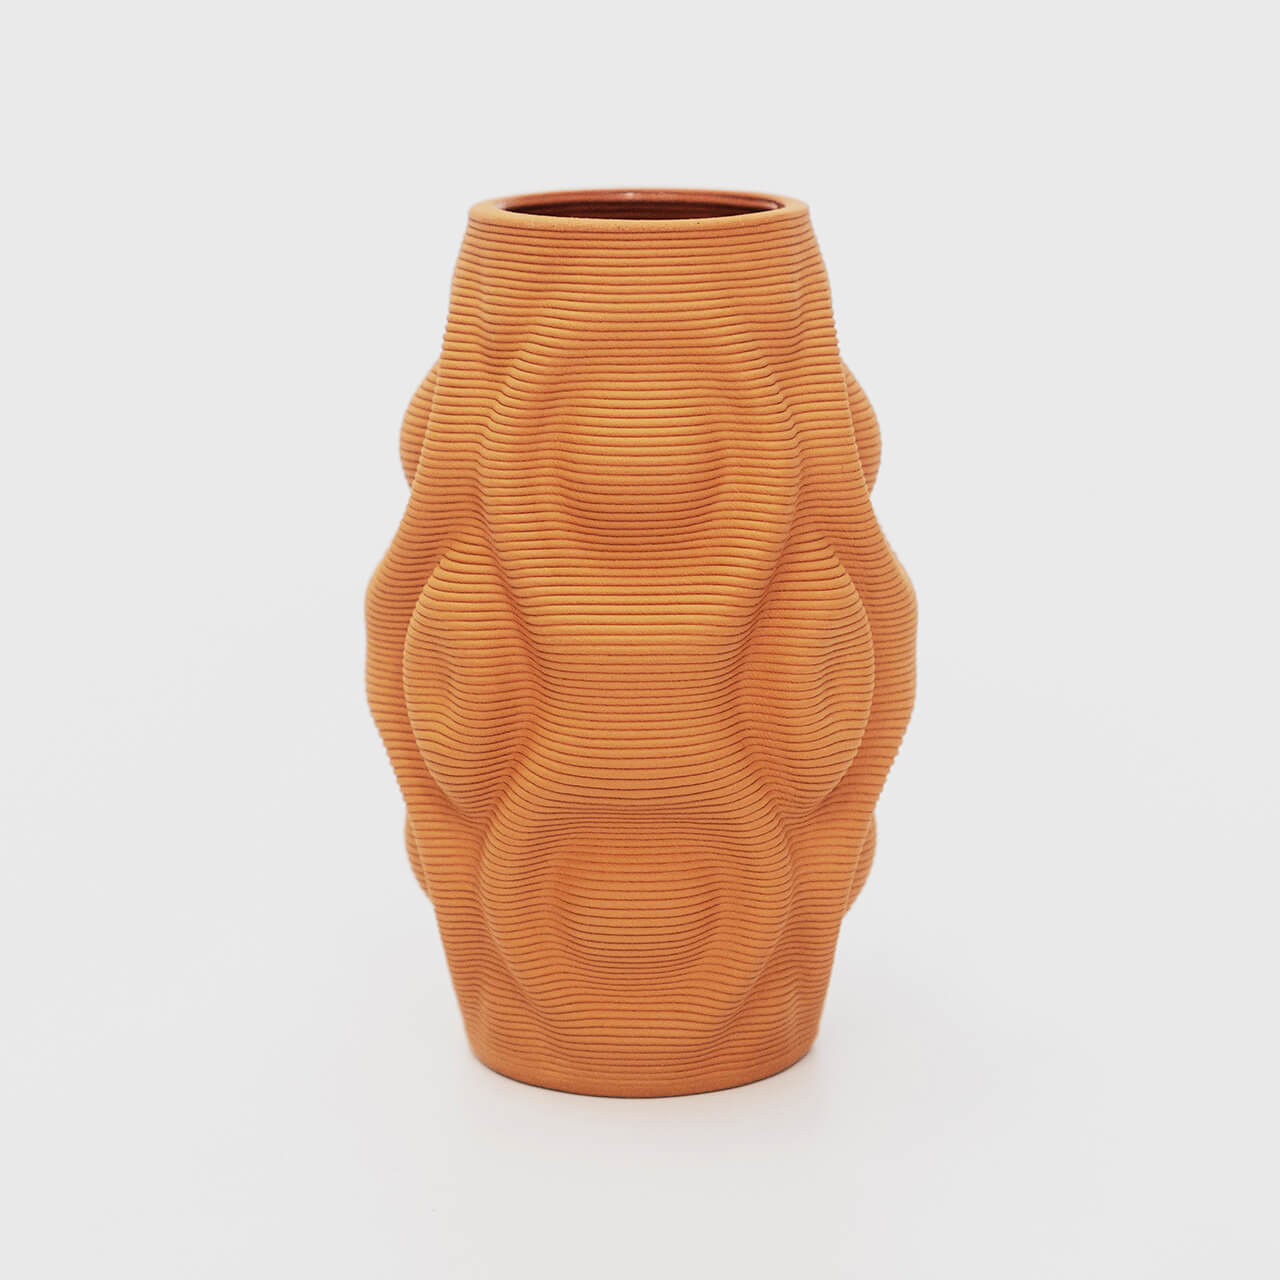 
                  
                    The vase's design features a curvaceous body, mimicking the gentle flow of water. It showcases organic ripples that undulate gracefully, evoking a sense of movement and fluidity. The shape is derived from mathematical formulas, meticulously translated into a 3D printed ceramic vase
                  
                